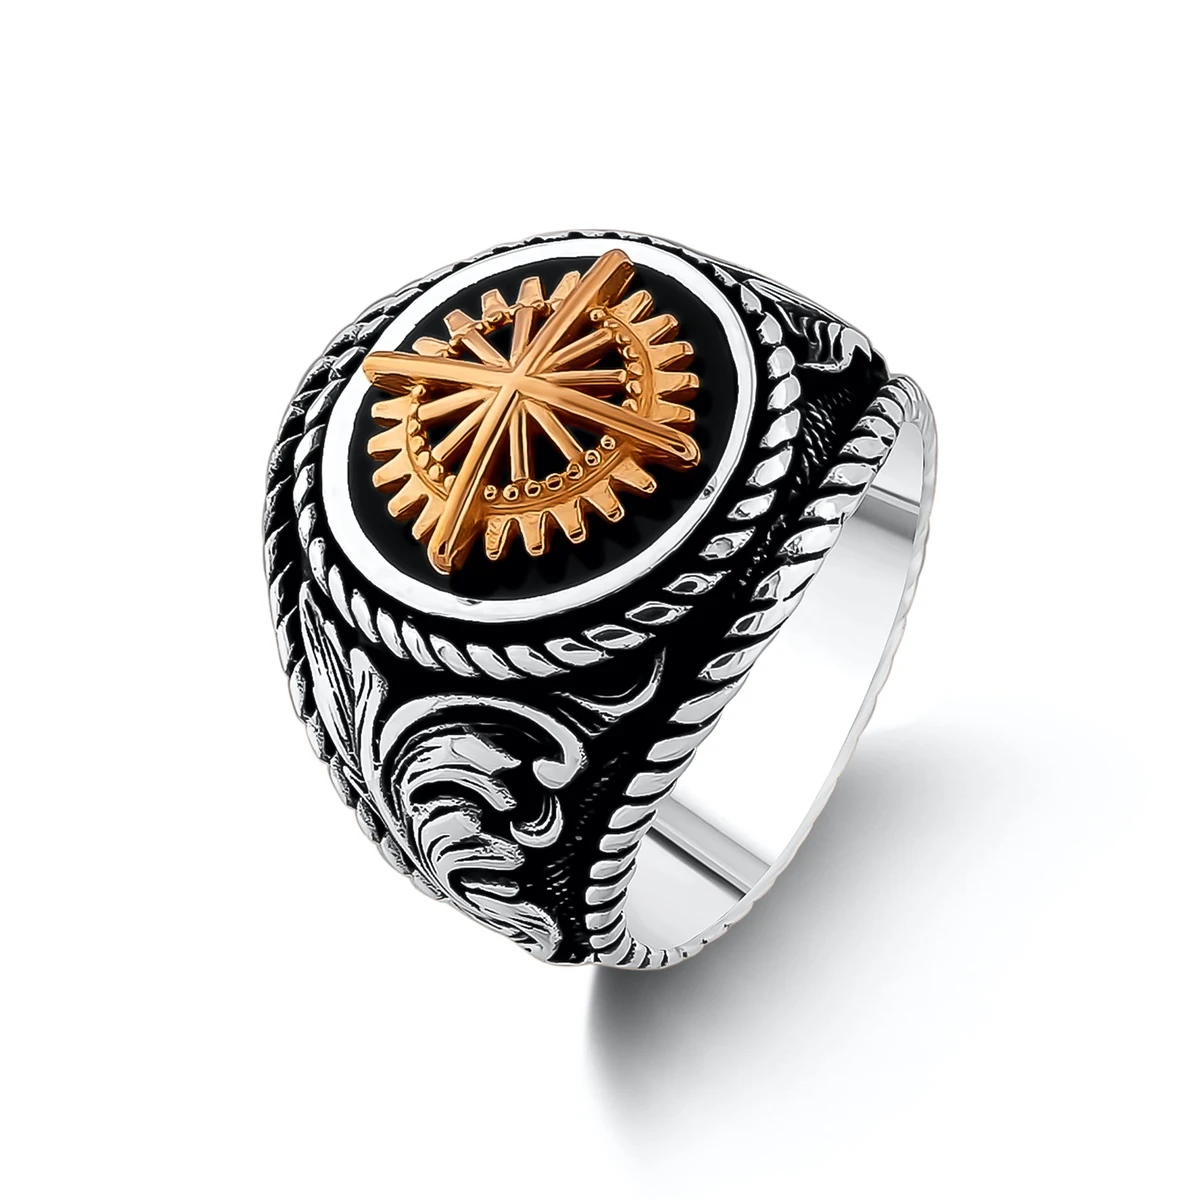 

Ottoman Motif with Compass Model Ring High Quality Fashionable Turkish Men Jewelry Solid 925 Sterling Silver Men For Gifts